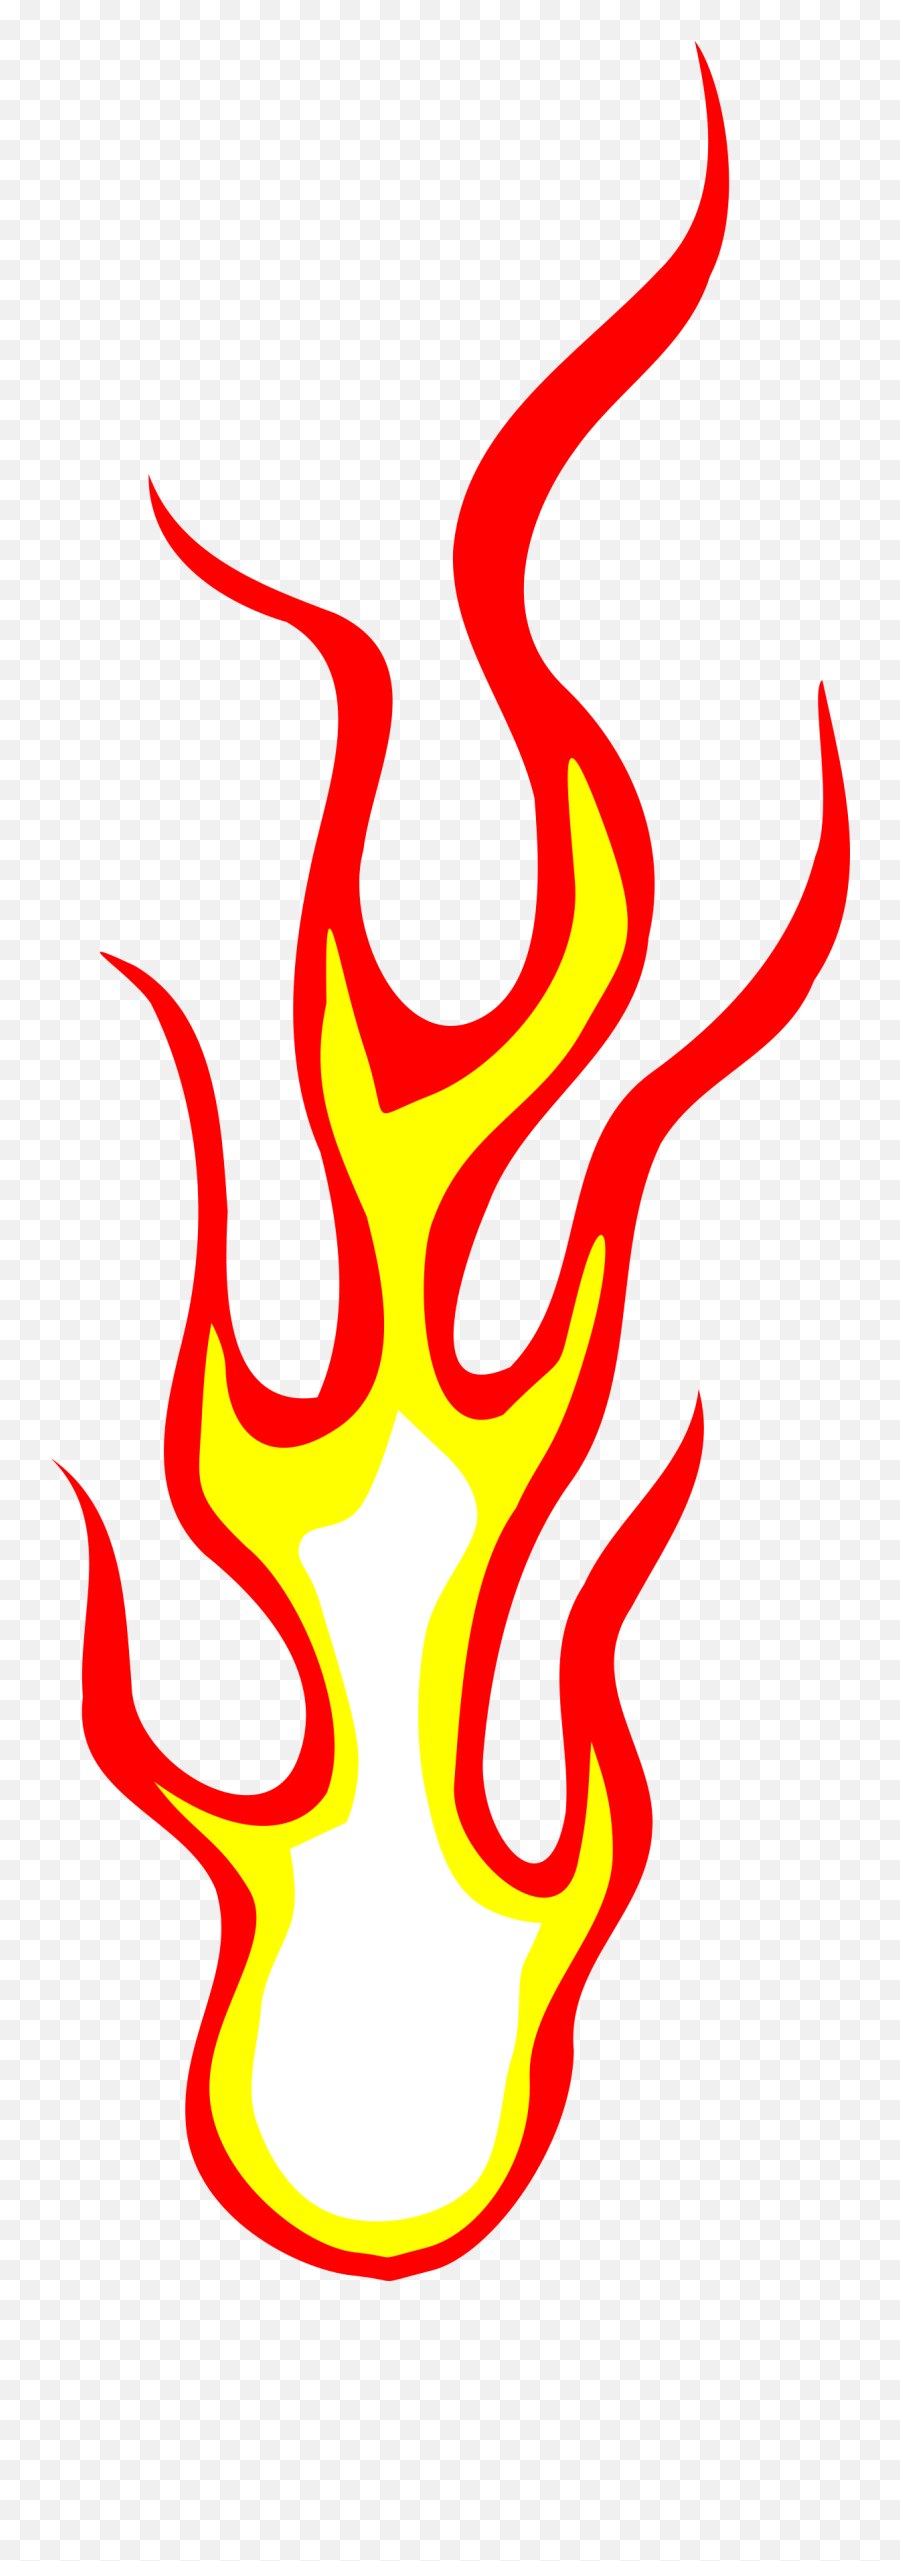 5 Fire Flame Clipart Transparent - Fire Flame Clipart Png,Fire Clipart Transparent Background